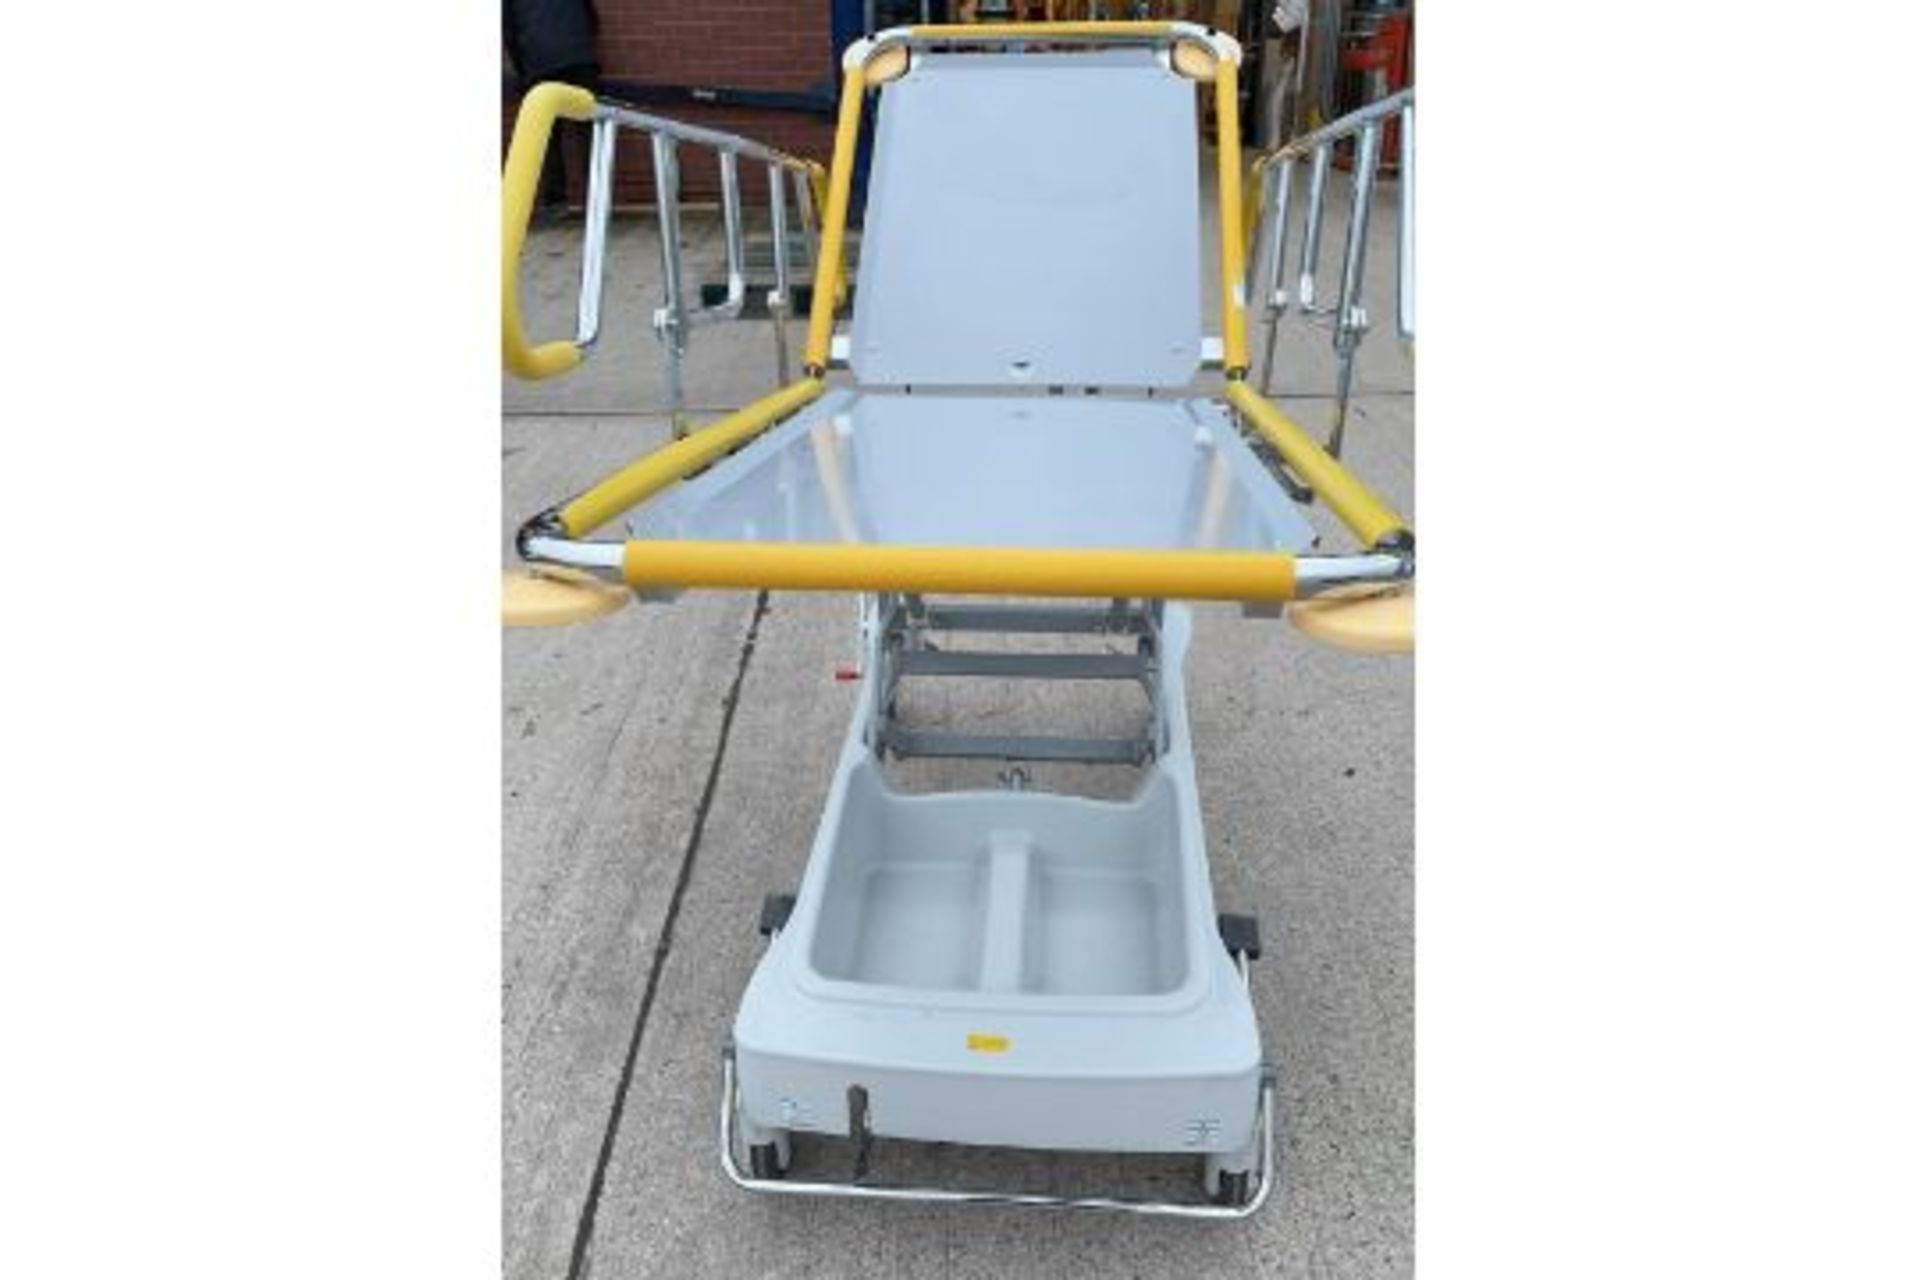 1 x Merivaara 'Emergo' Electric Medical Patient Trolley - Dimensions: 200 x 70 x H54cm - CL011 - - Image 3 of 5